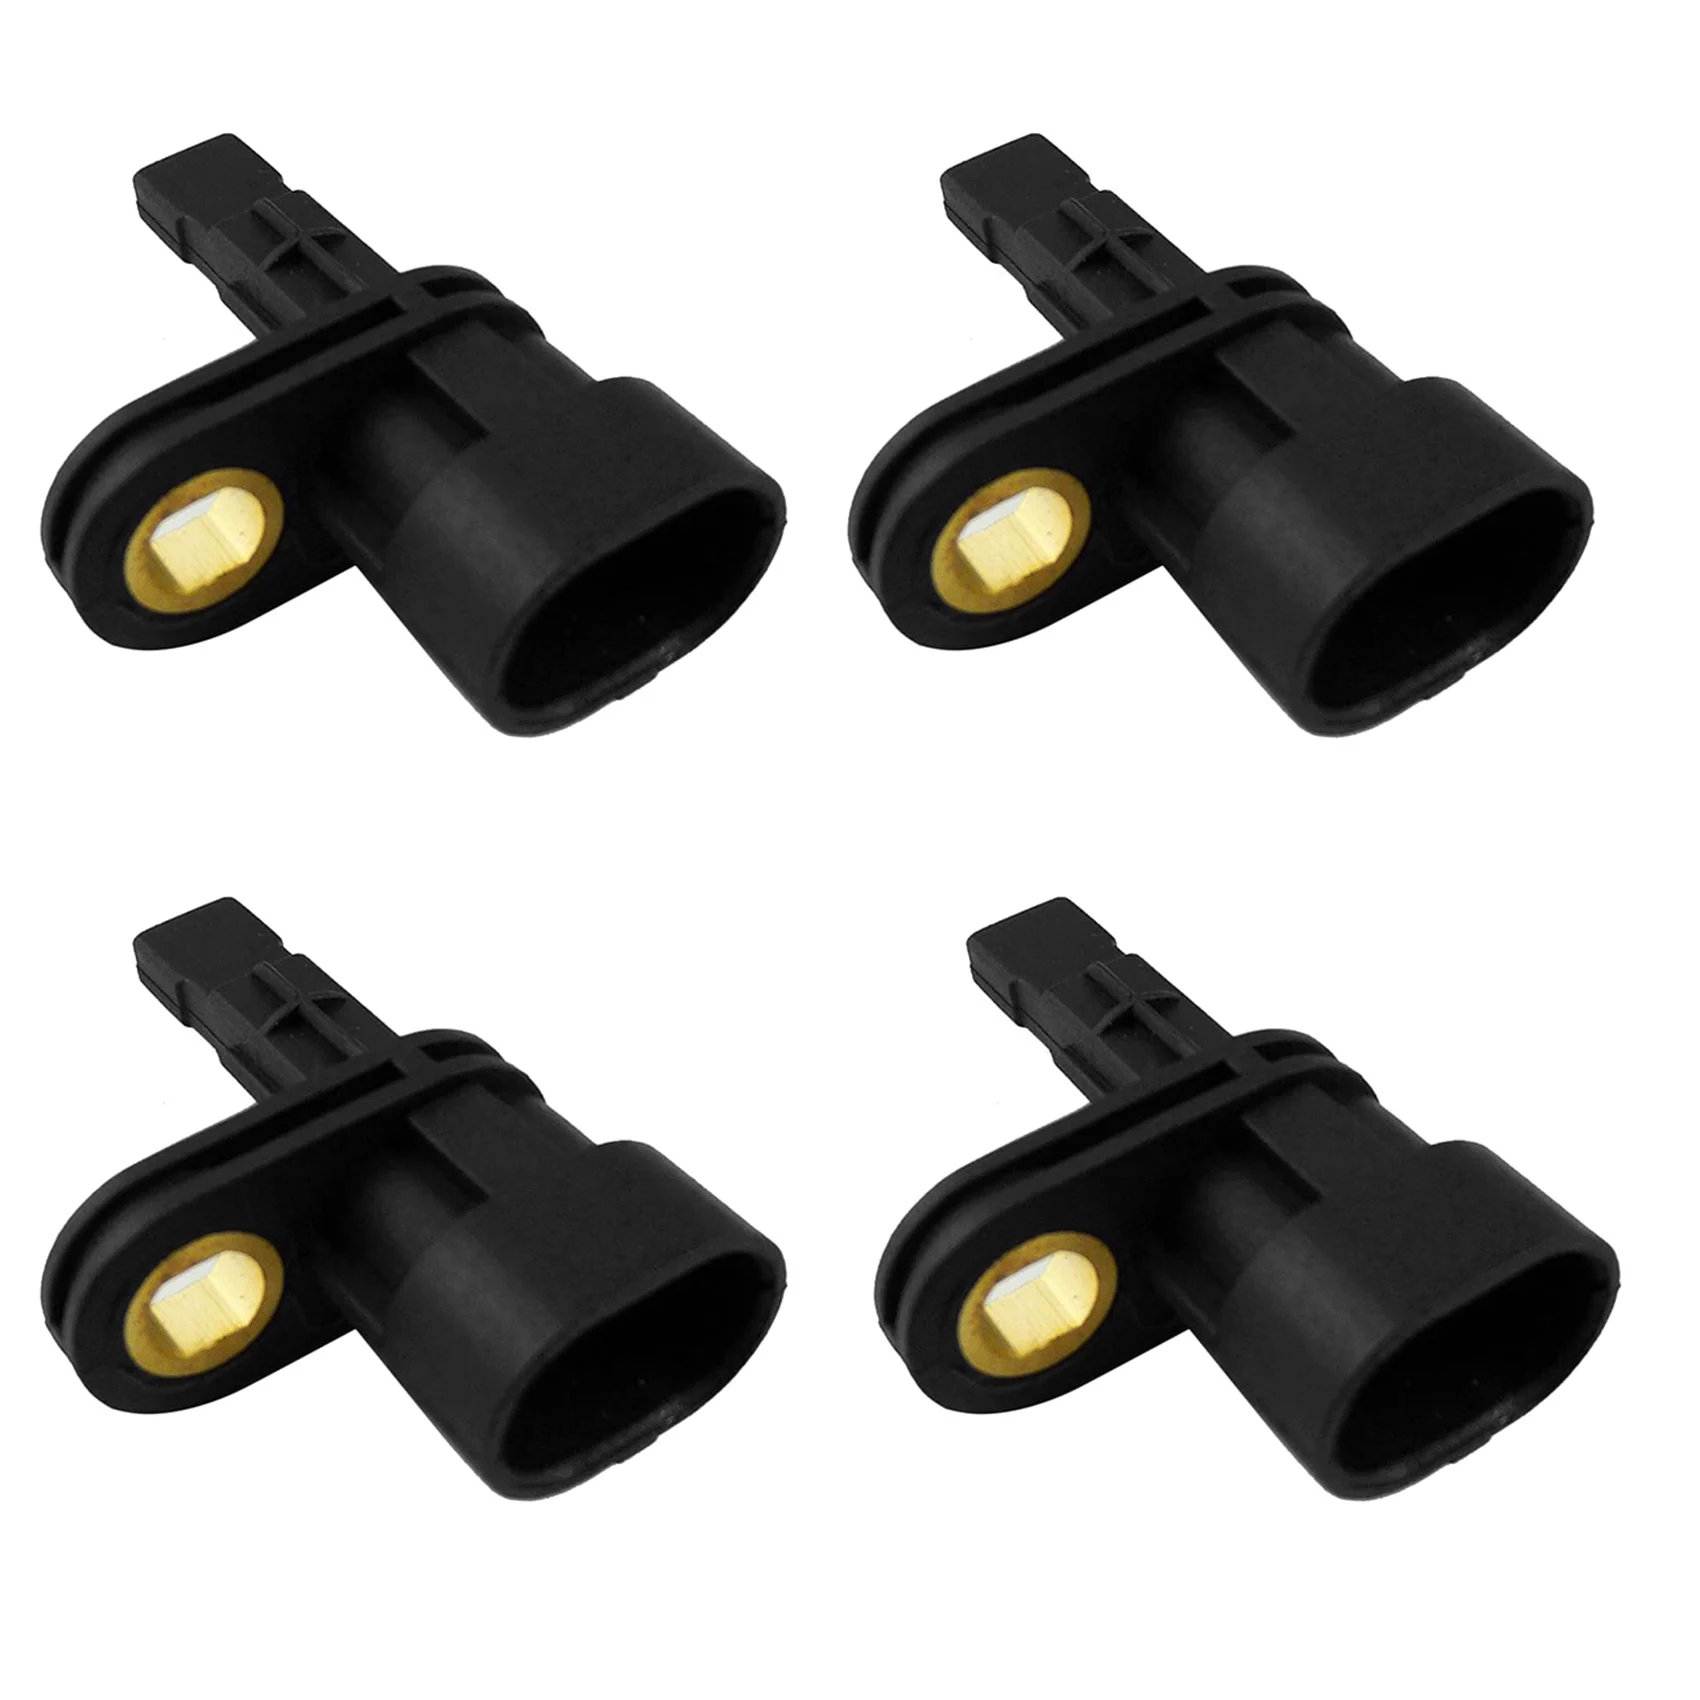 

4X 2Pin 92211237 Car Rear ABS Wheel Speed Sensor 5S11266 SU12719 for Buick Chevrolet Caprice Pontiac G8 for Holden